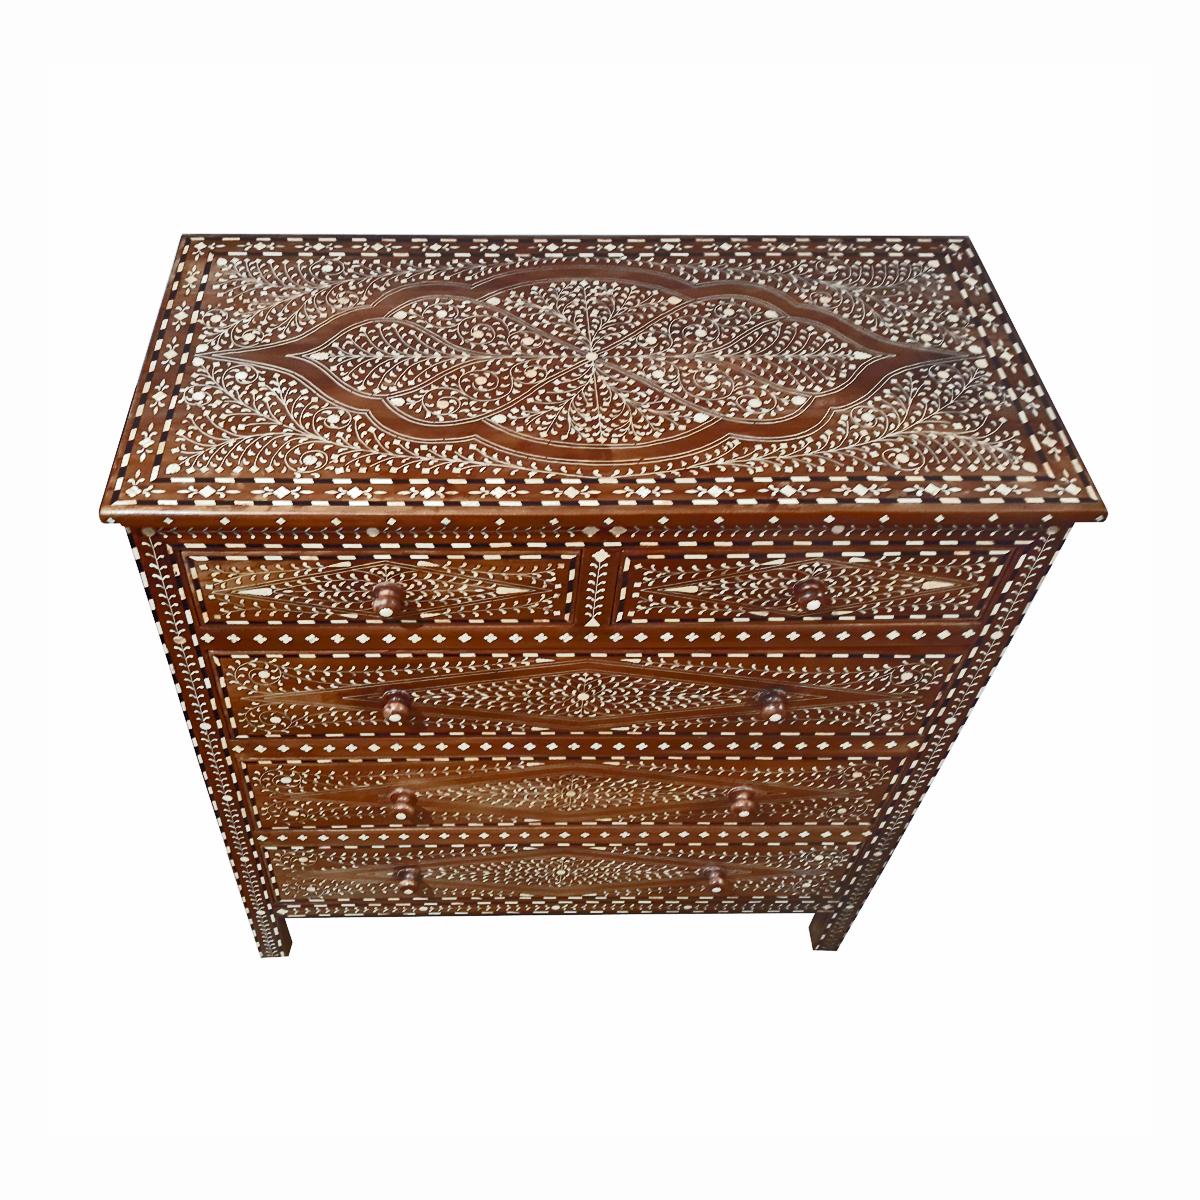 Bone-Inlaid Teak Chest of Drawers from India  4